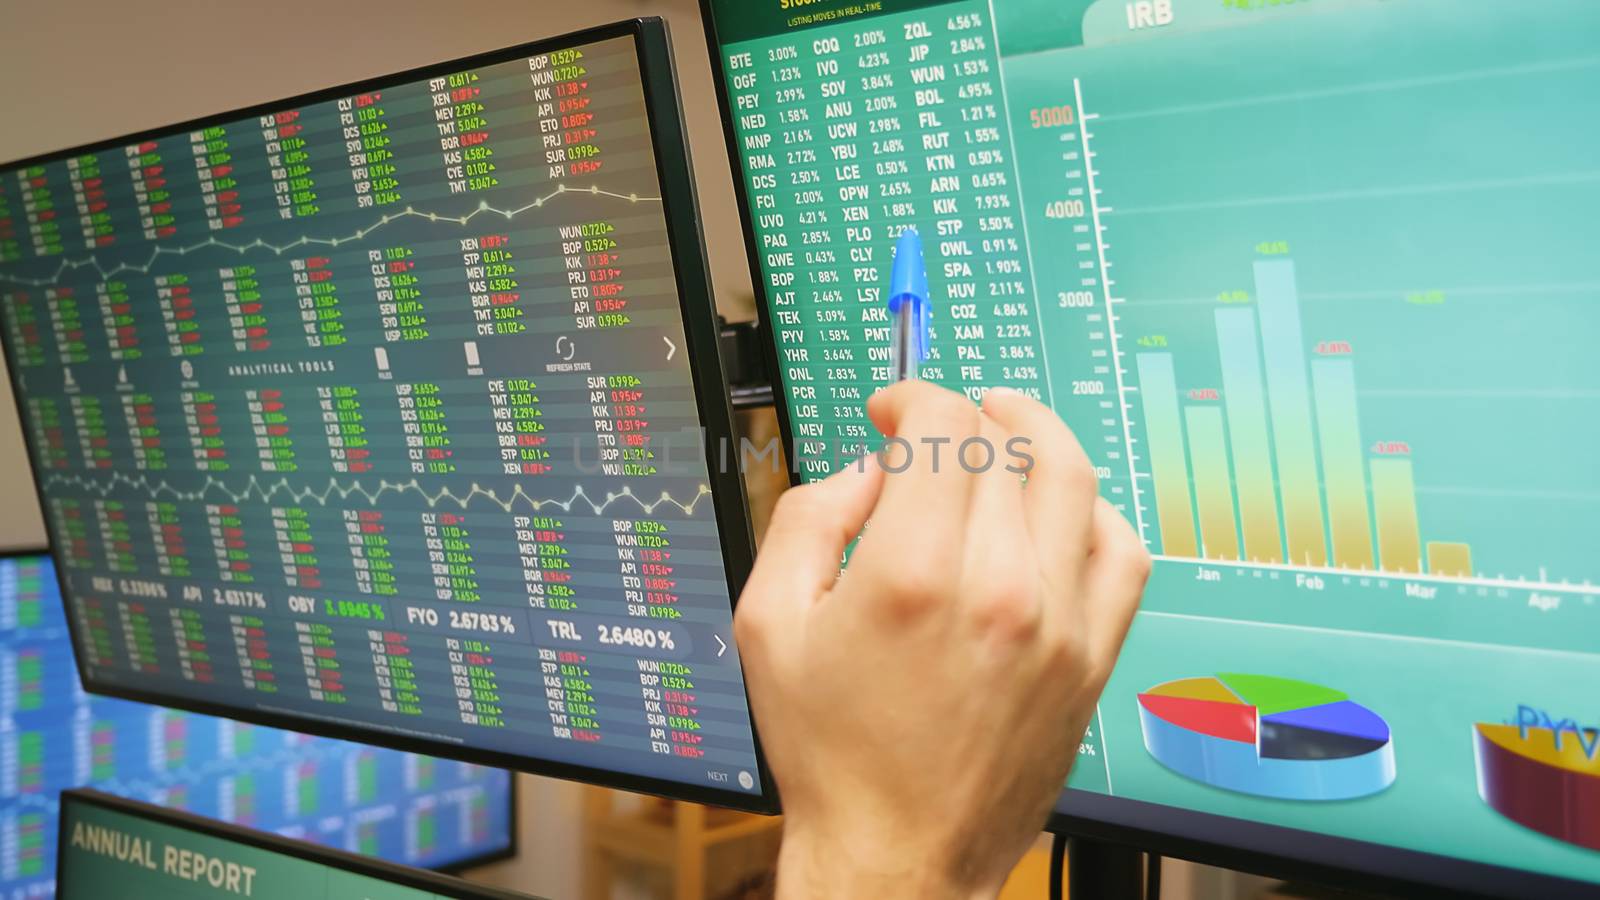 Close up of stock market trader hand on monitors with financial graphs. Economy crash.